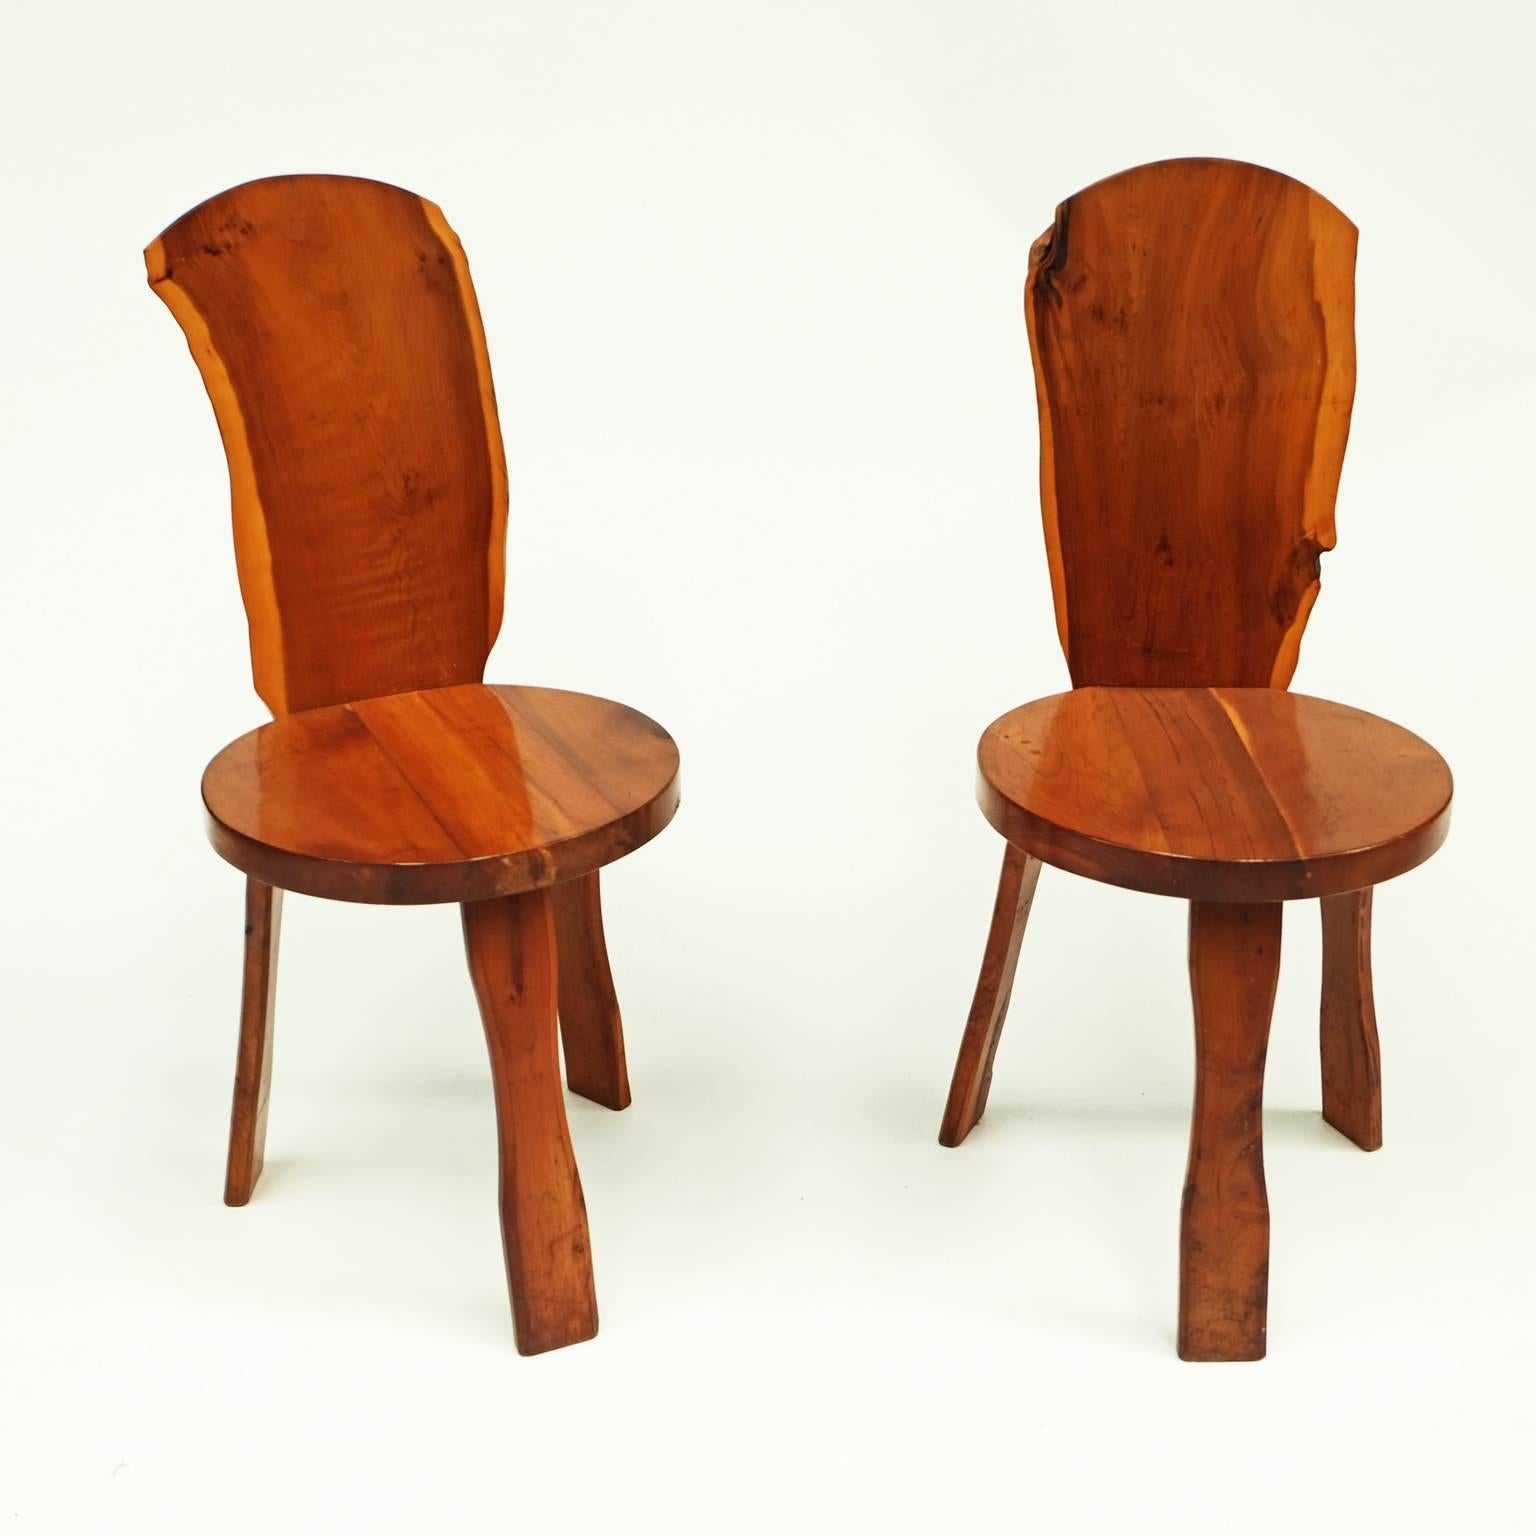 Rare 1950s yew wood chairs designed by Garth Reynolds for Reynolds of Ludlow, UK. Stamped to the base.

Reynolds of Ludlow was a British artisan company run by a father and son team. They were inspired by the Arts & Crafts movement and the work of